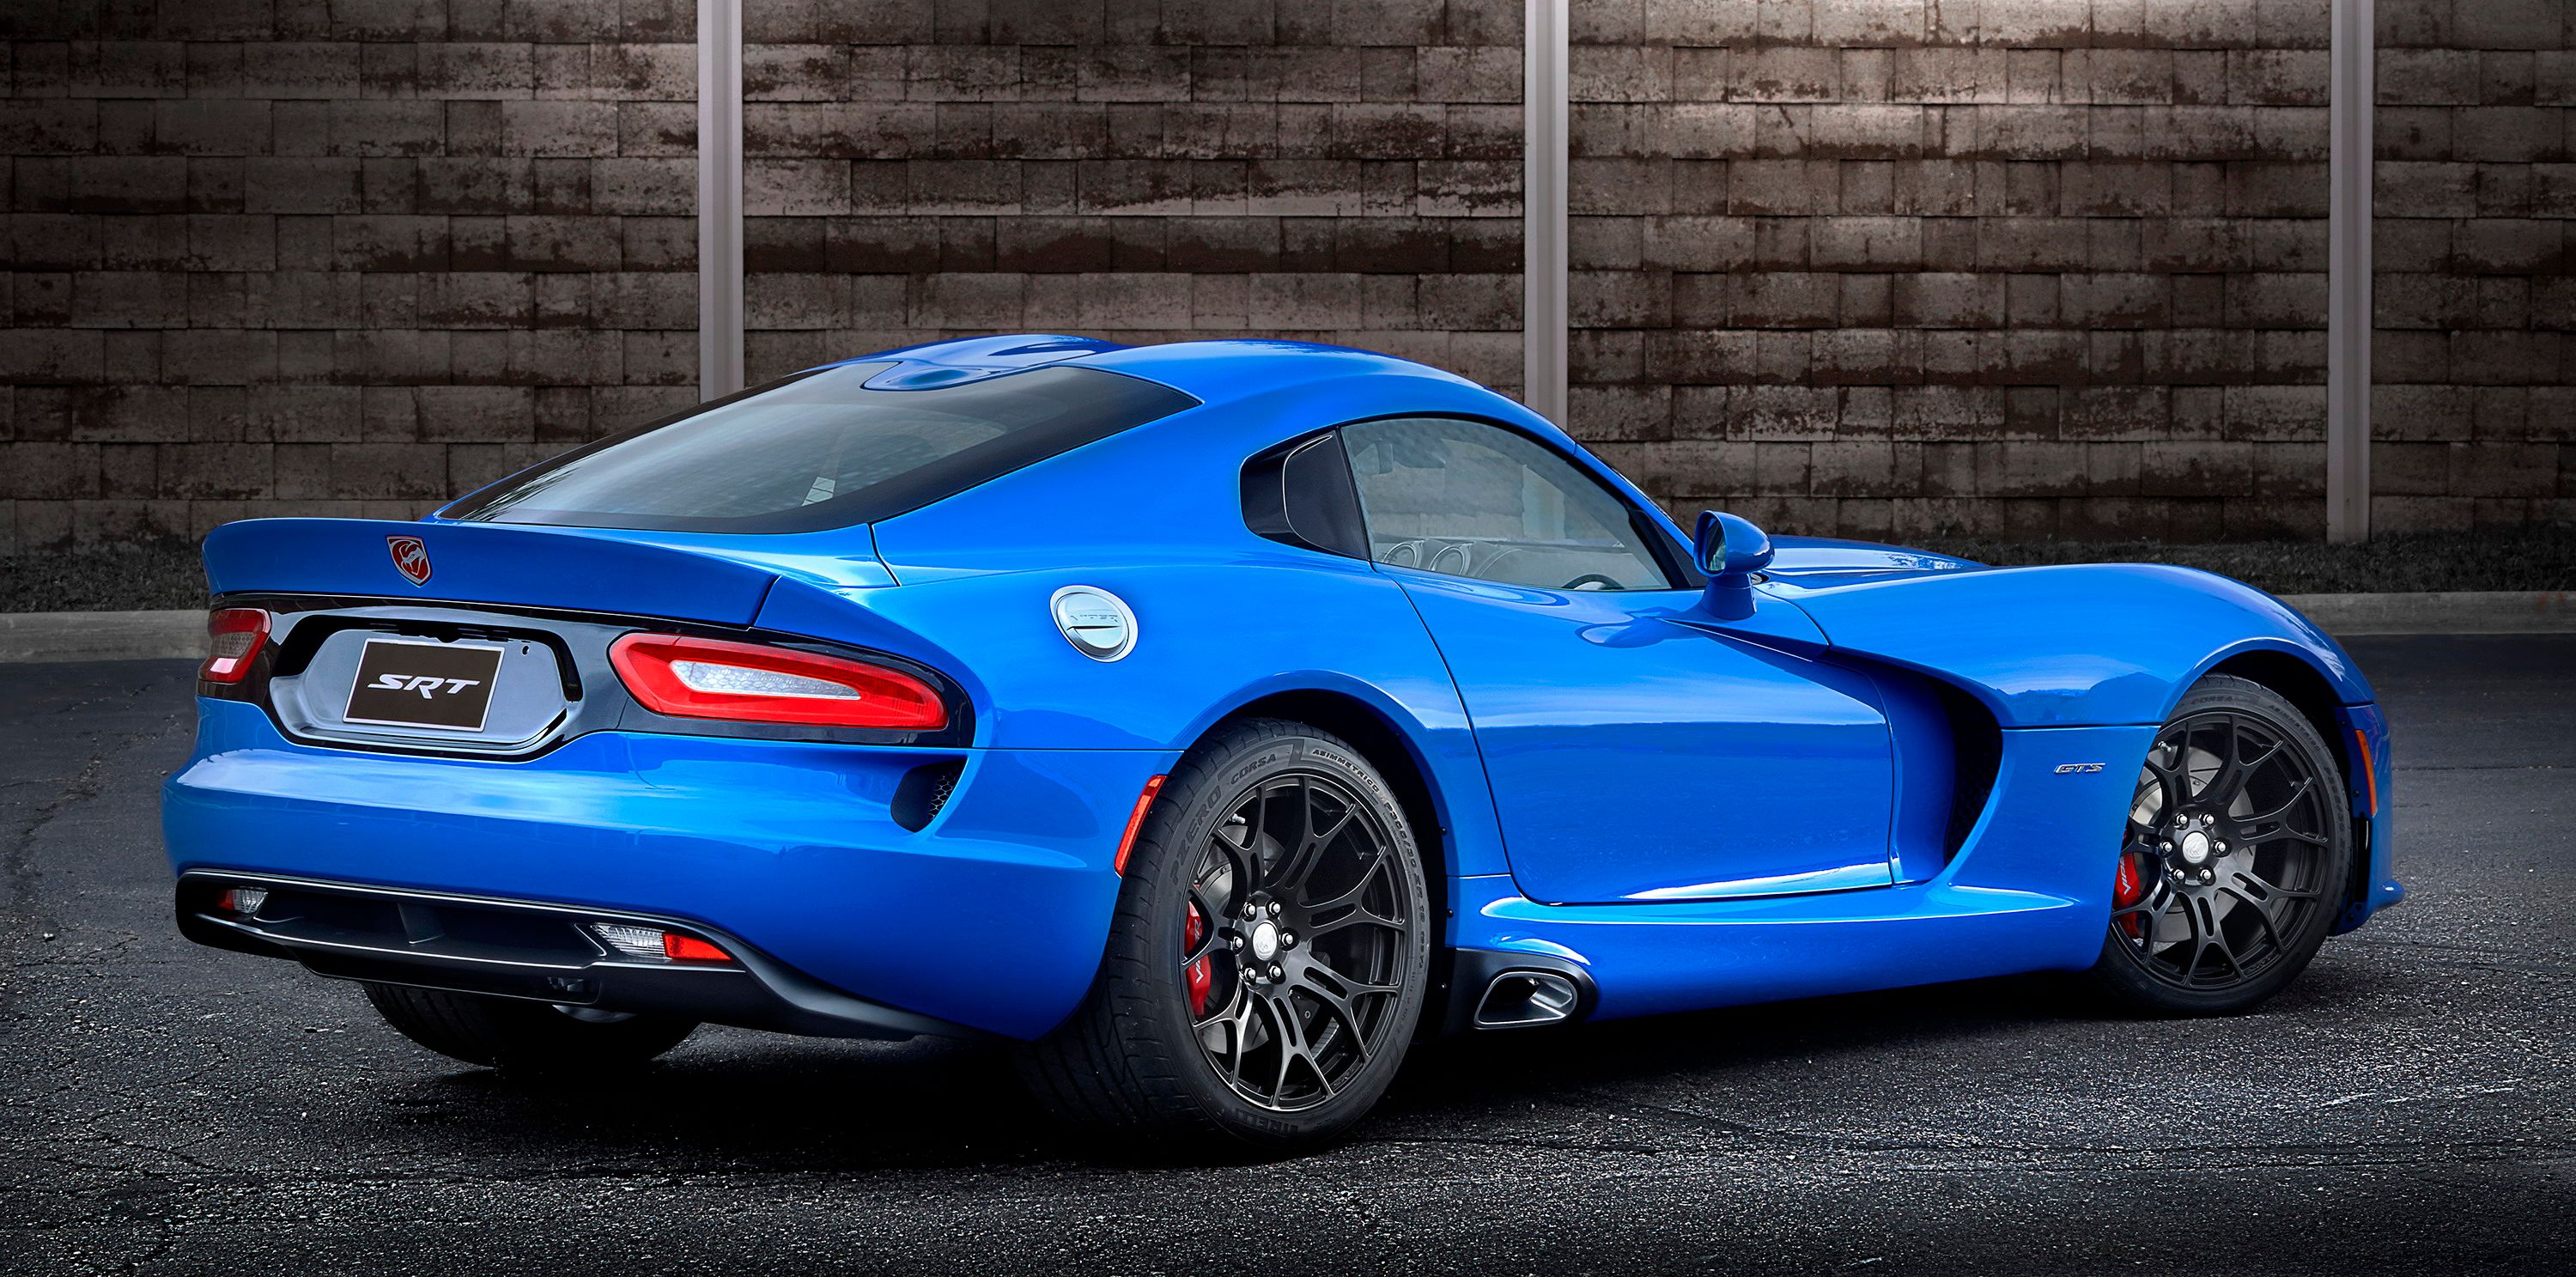 2015 Dodge Viper GTS Ceramic Blue Edition Package